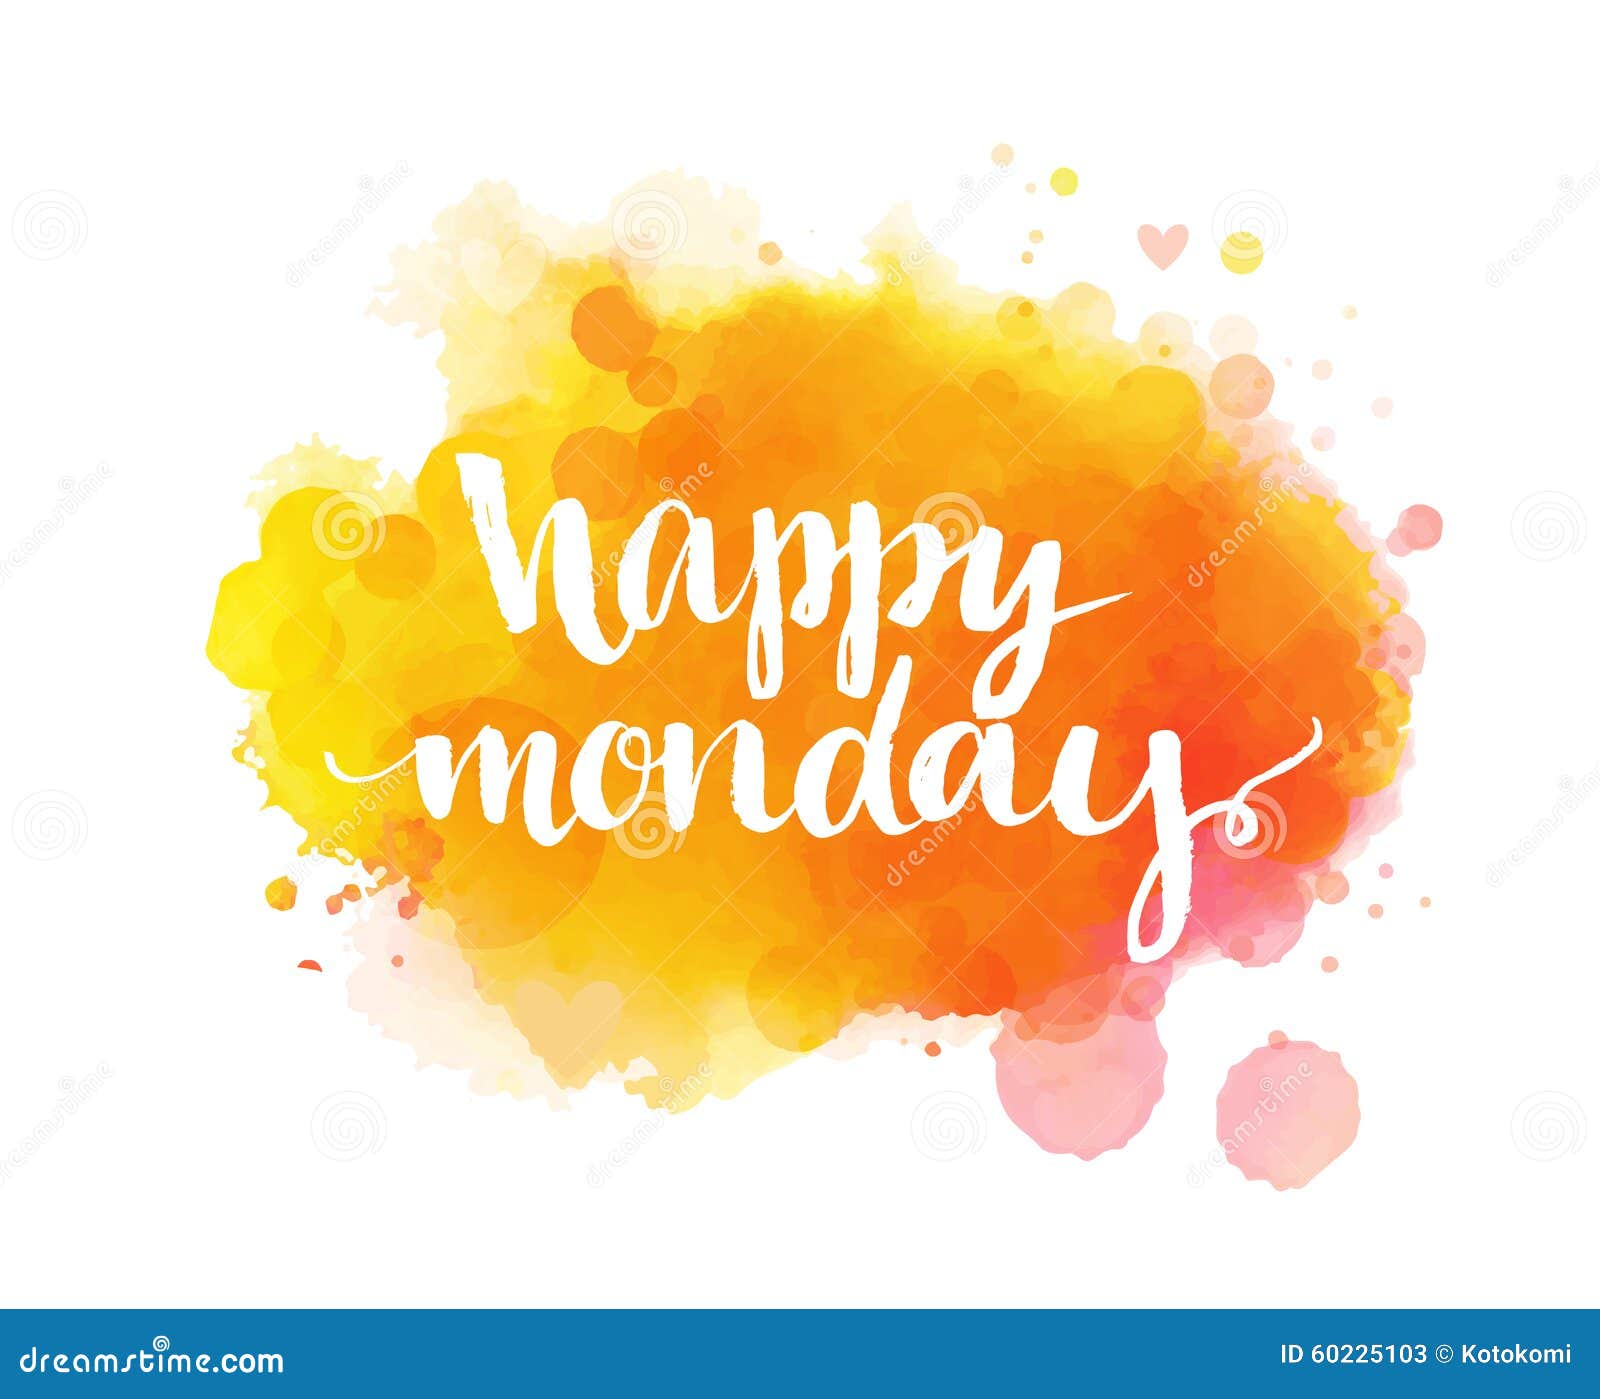 Happy Monday. Inspirational Quote, Artistic Vector Stock Vector ...